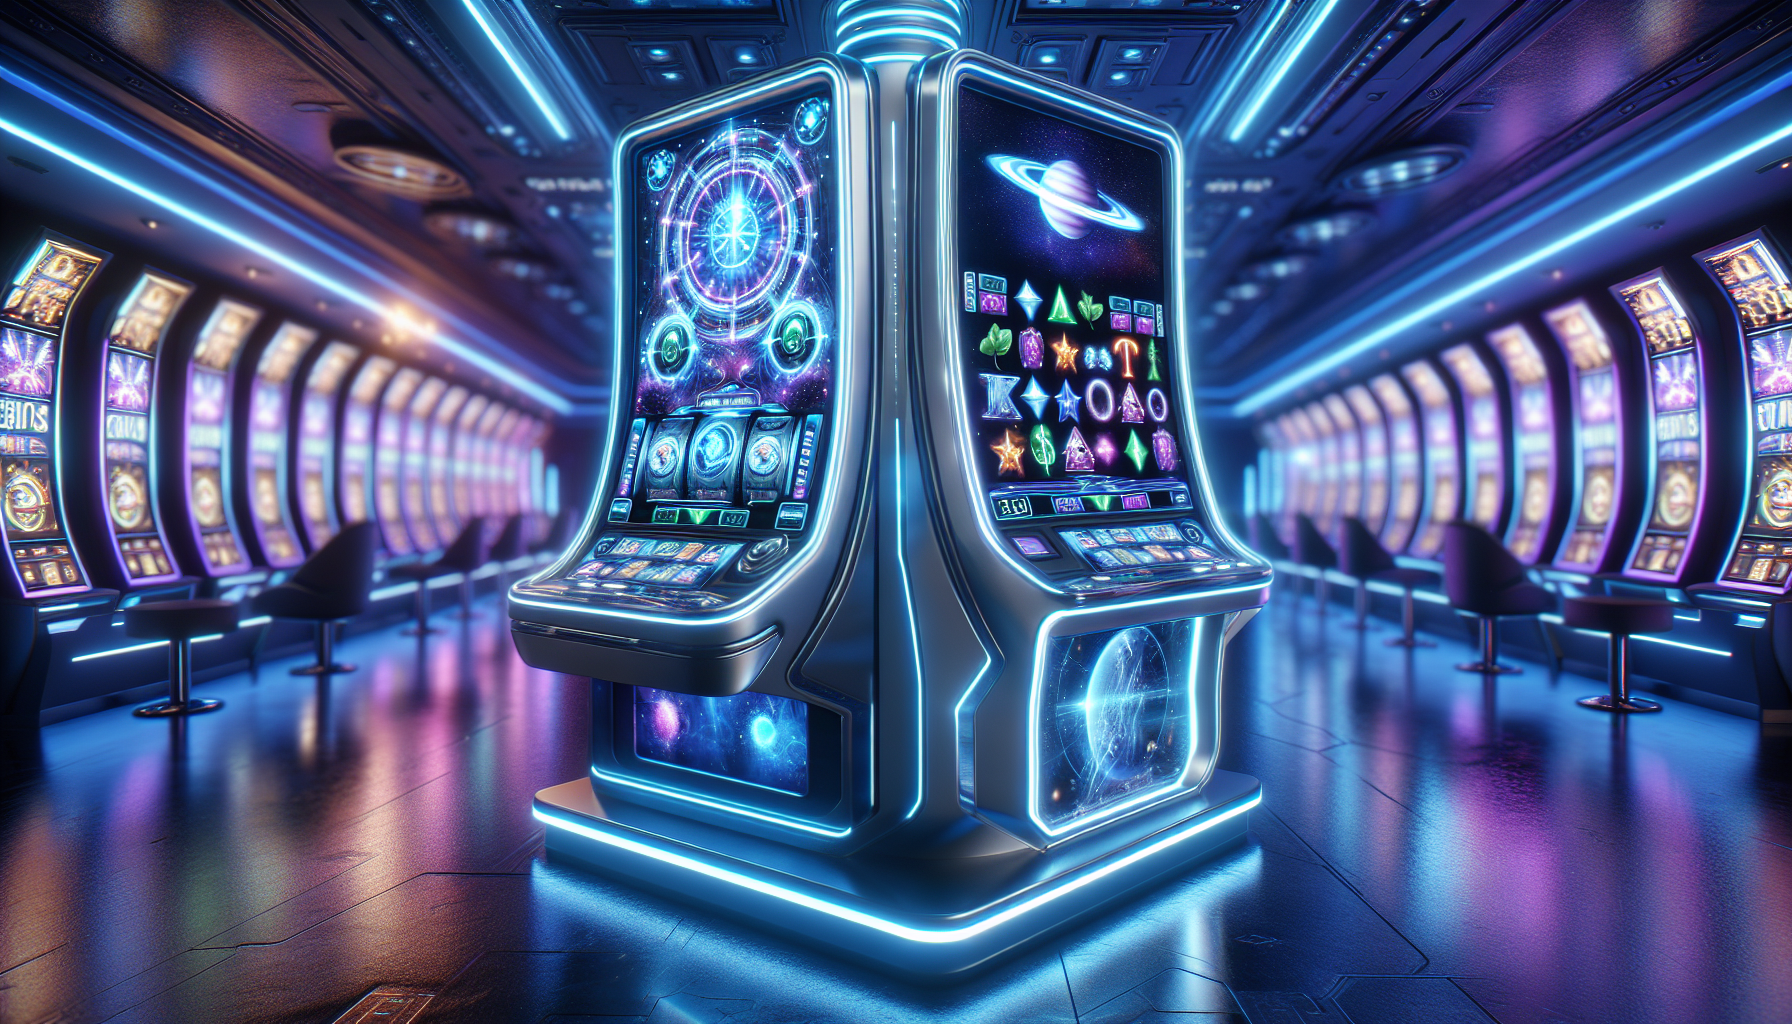 An illustration of a futuristic slot machine with dazzling lights and symbols